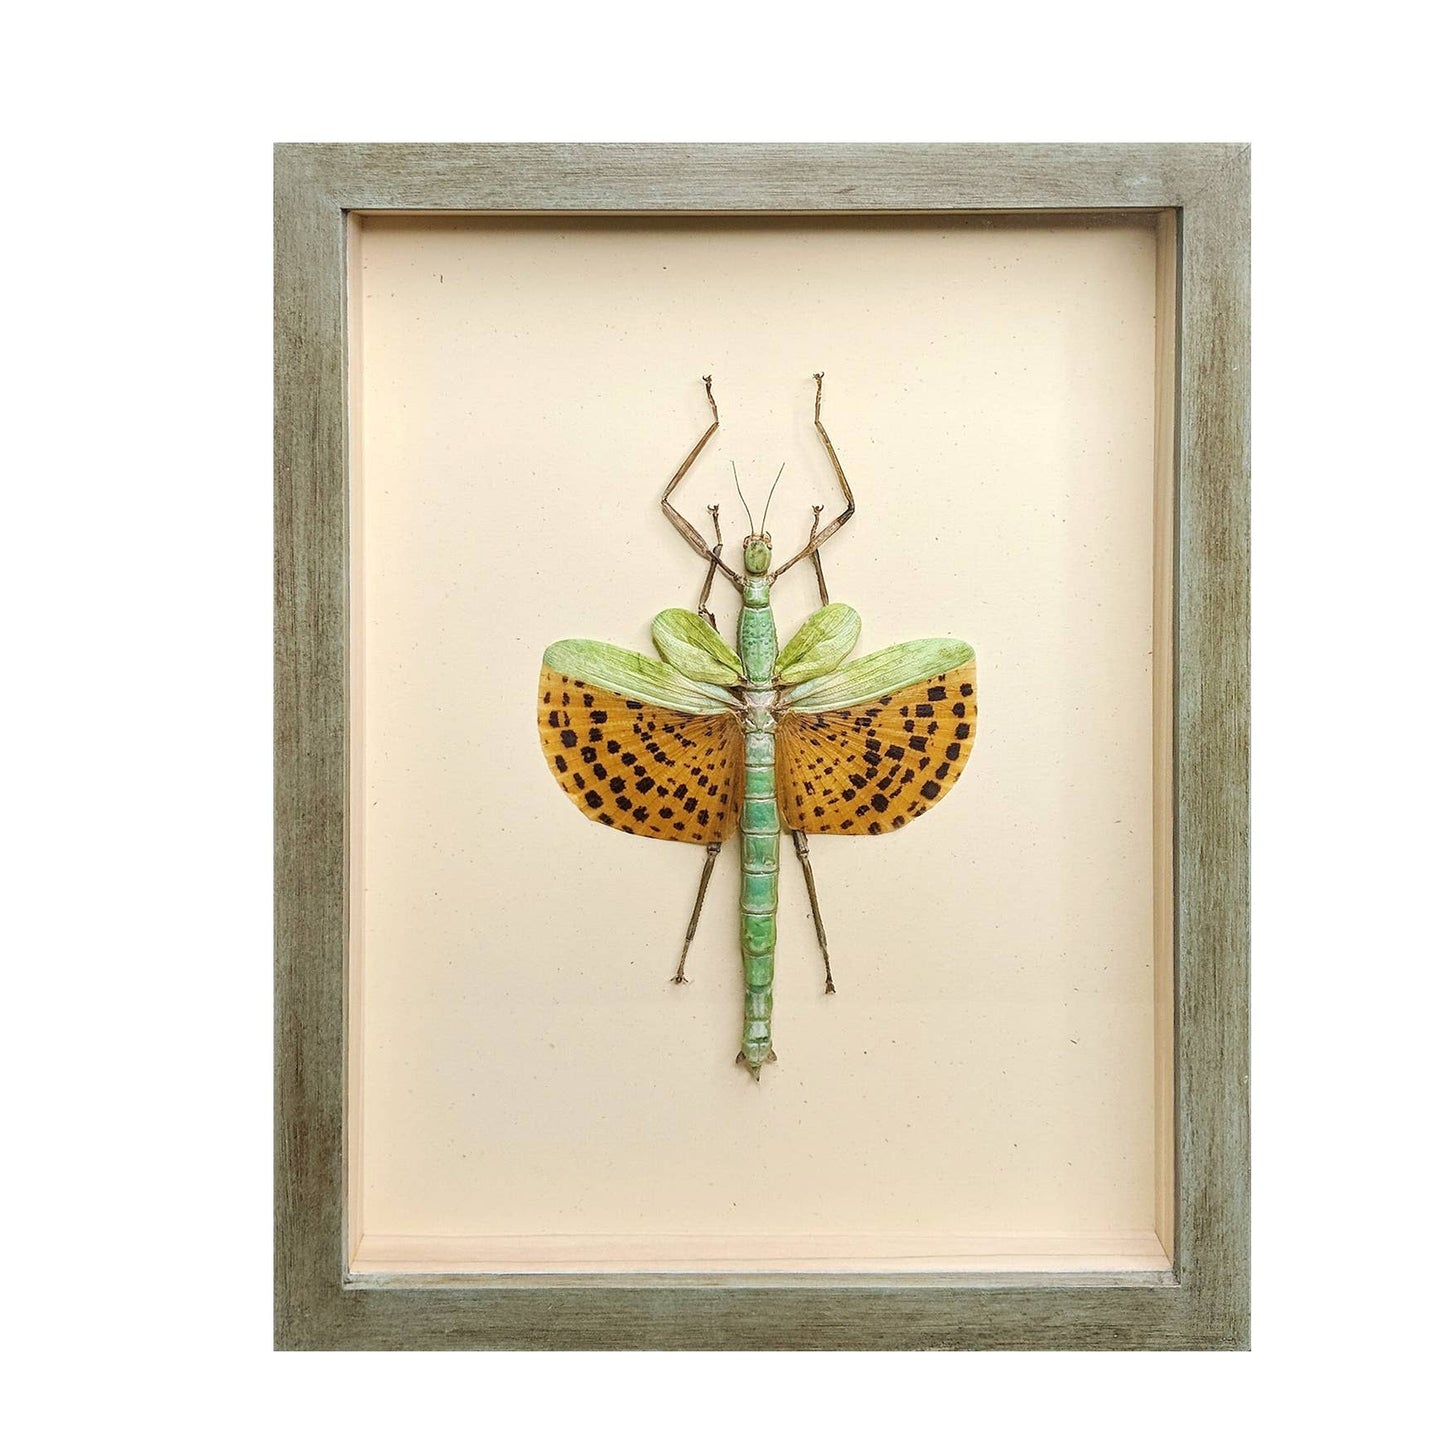 Giant Spotted Stick Insect Shadowbox: Black Frame